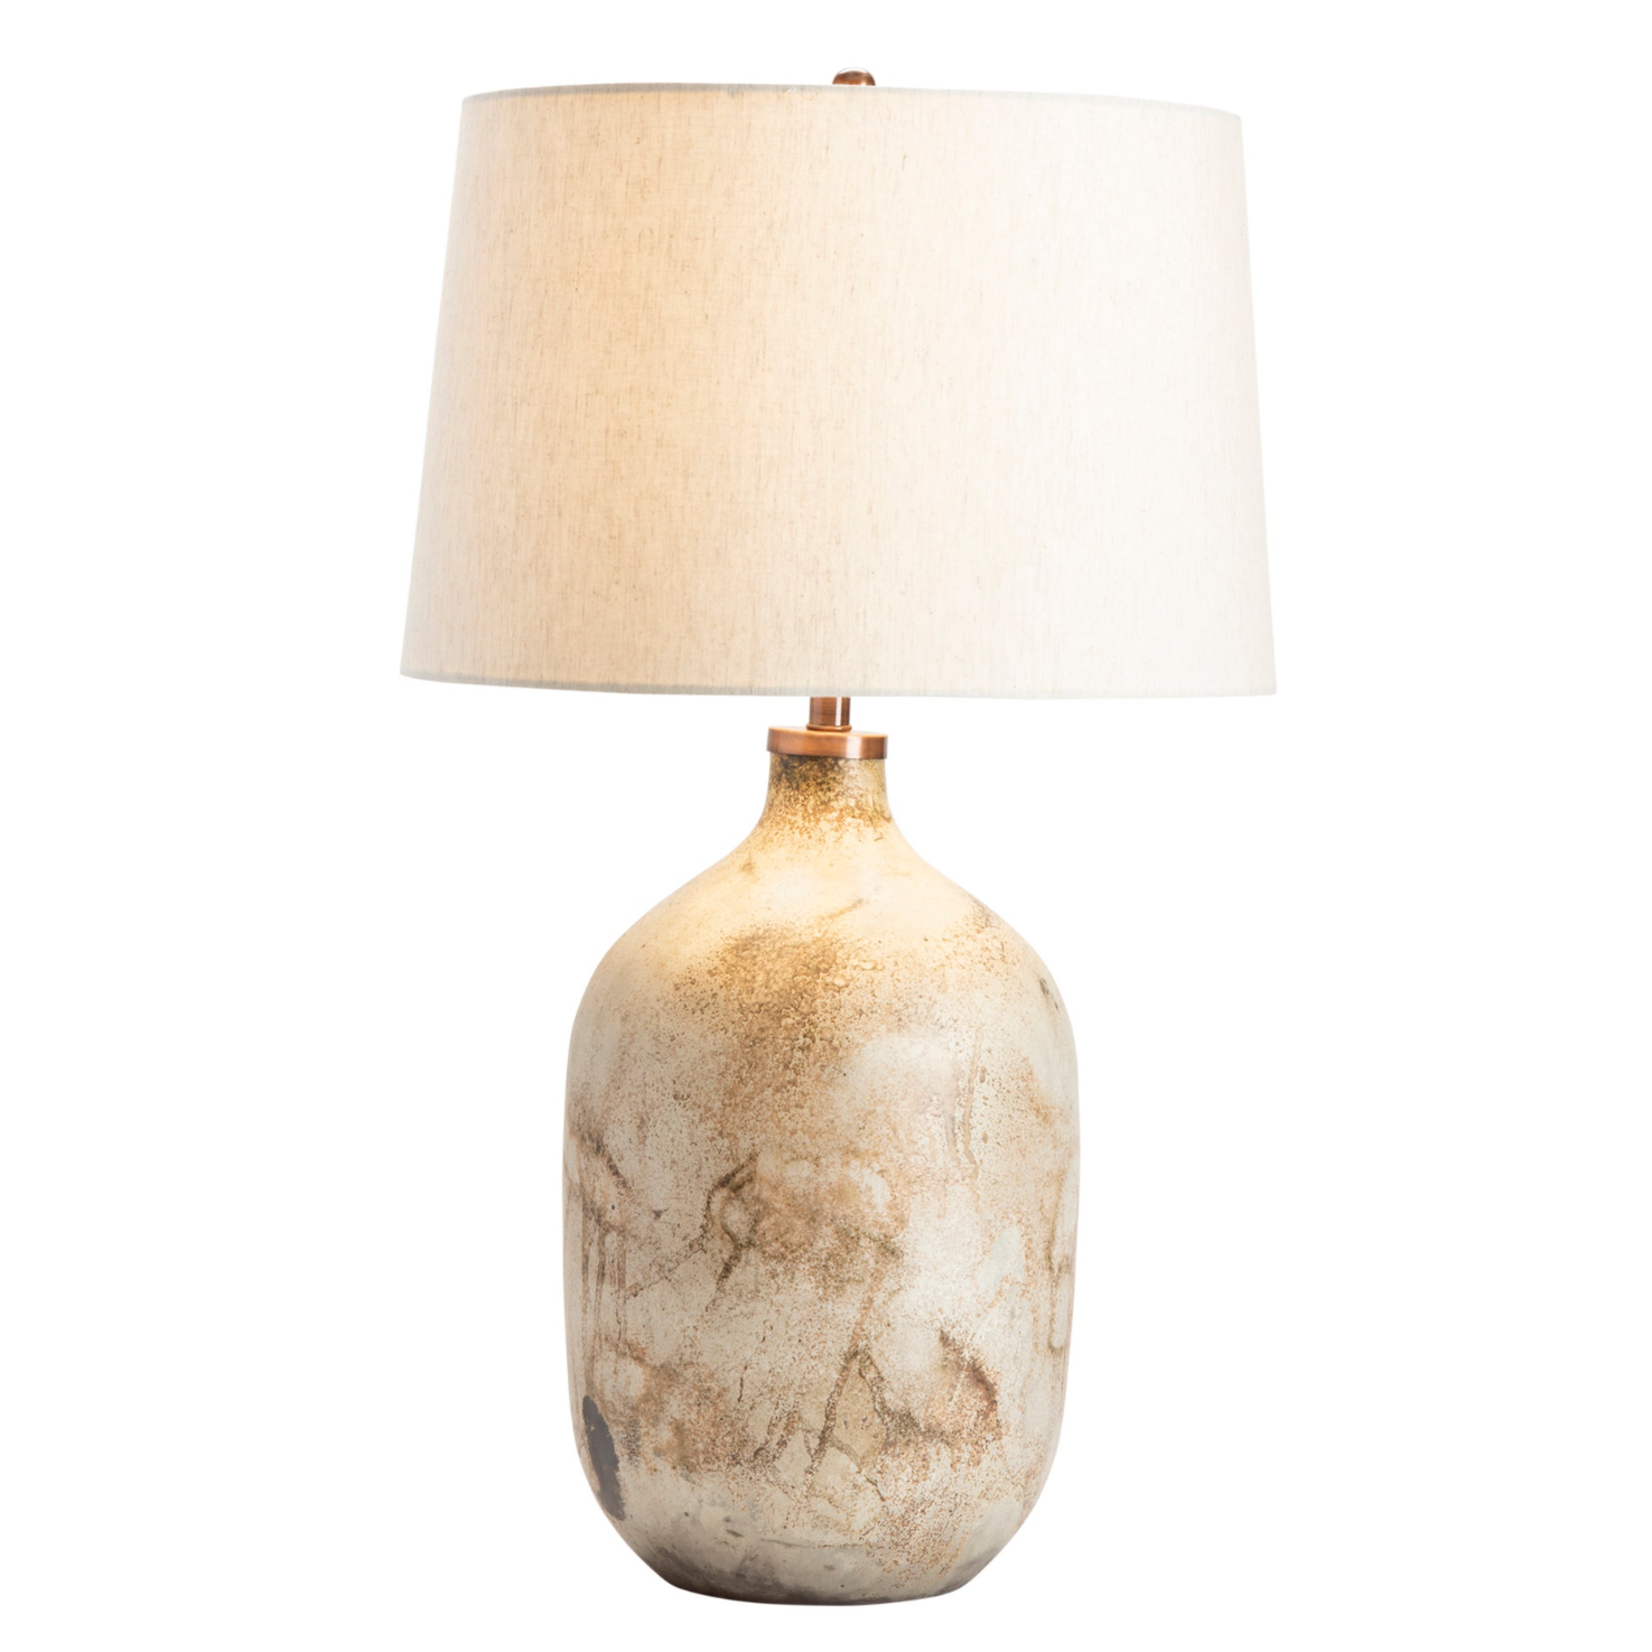 Mickler & Co. Camile Table Lamp